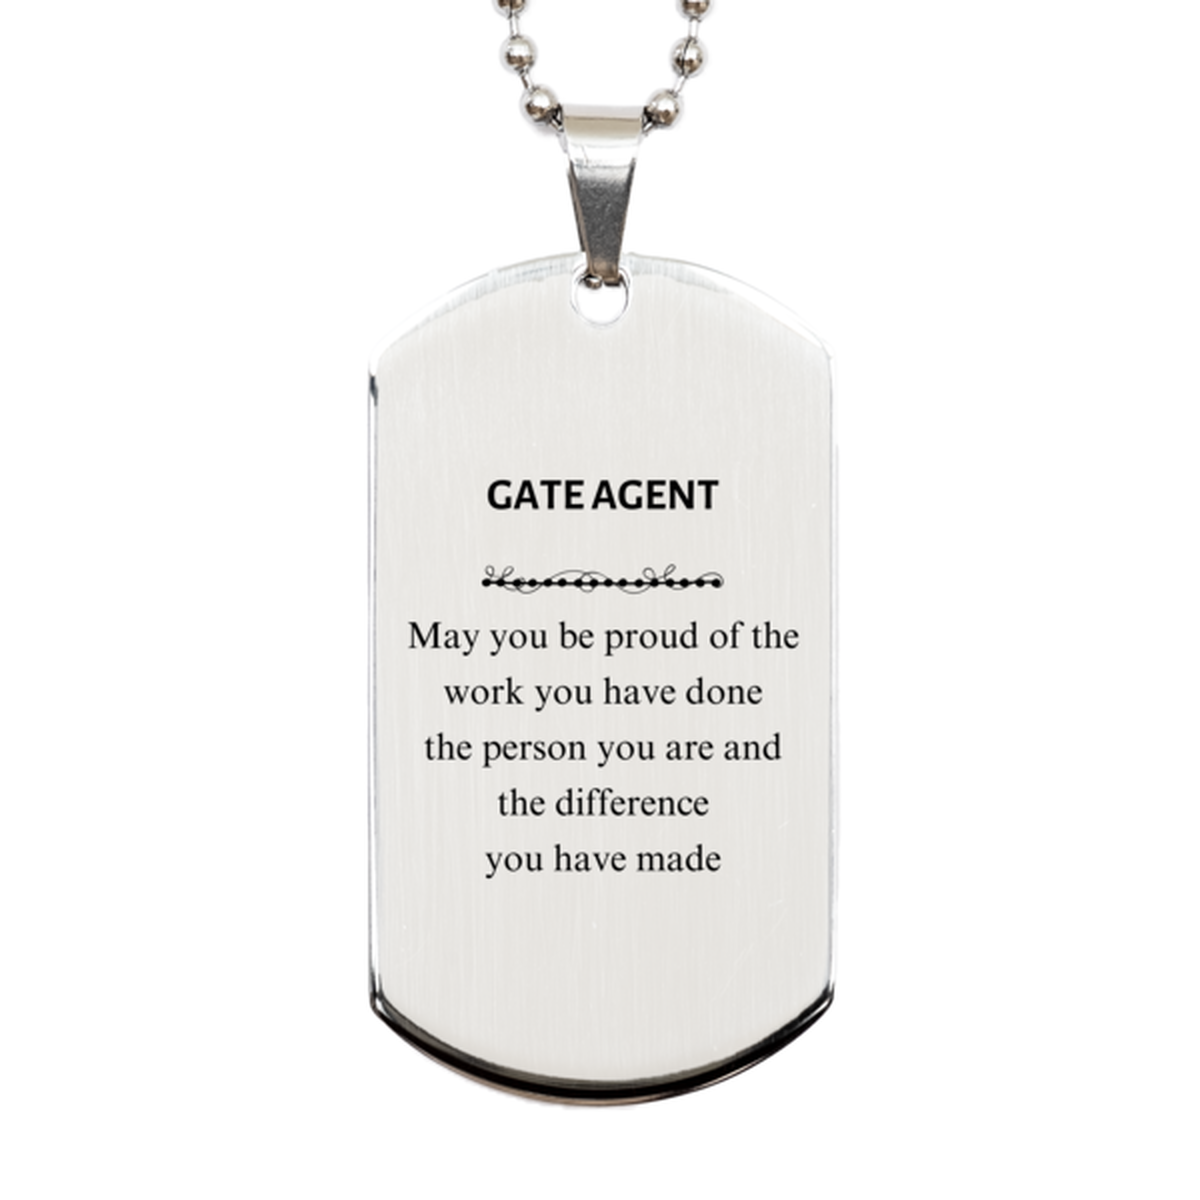 Gate Agent May you be proud of the work you have done, Retirement Gate Agent Silver Dog Tag for Colleague Appreciation Gifts Amazing for Gate Agent